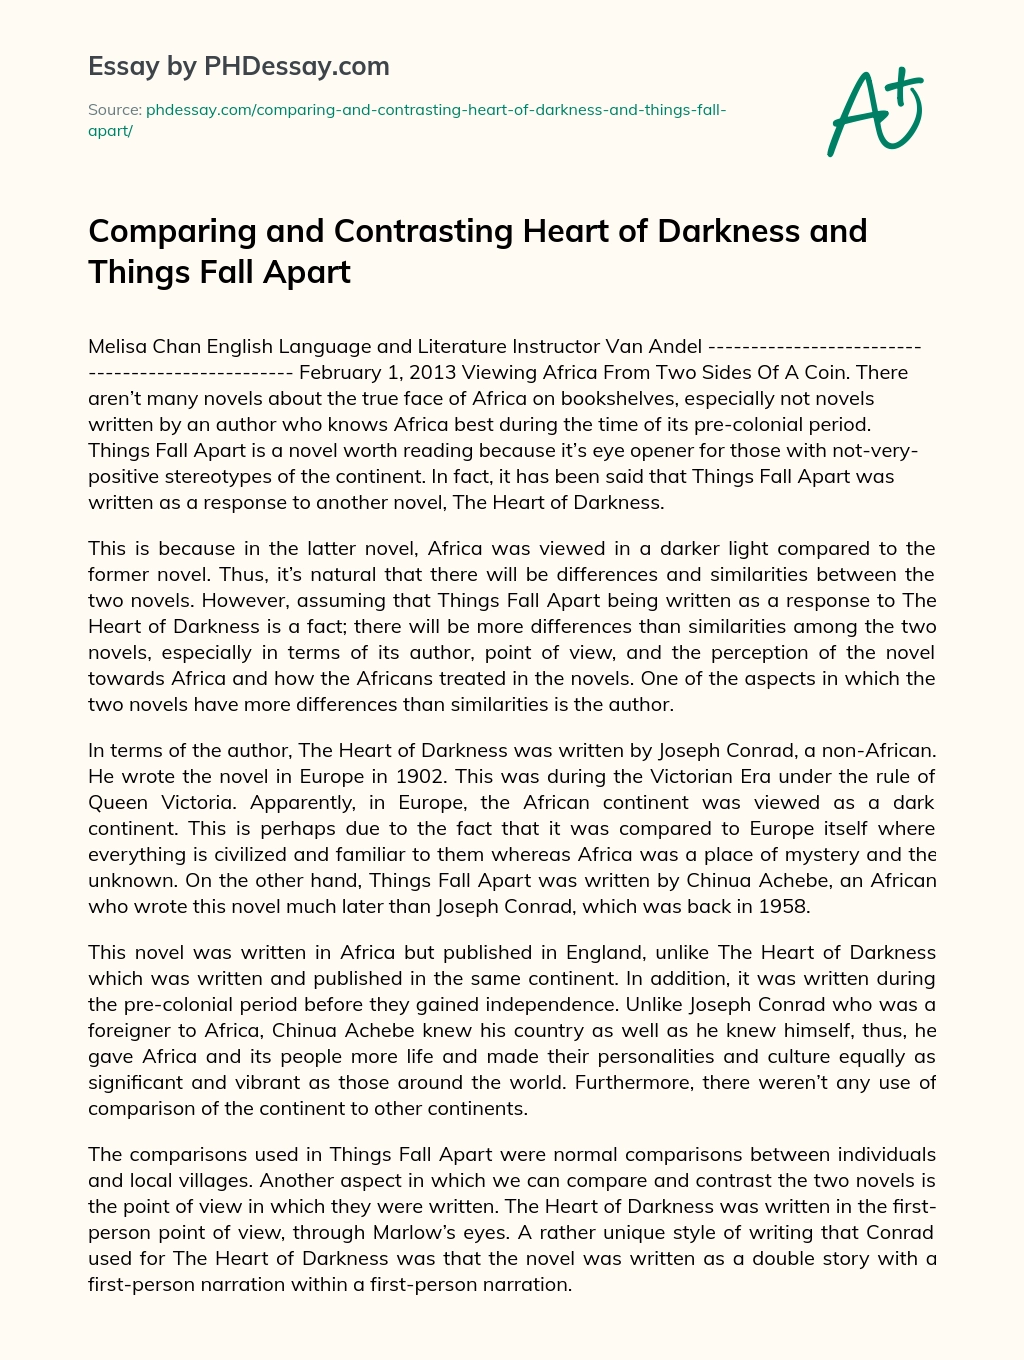 Comparing and Contrasting Heart of Darkness and Things Fall Apart essay